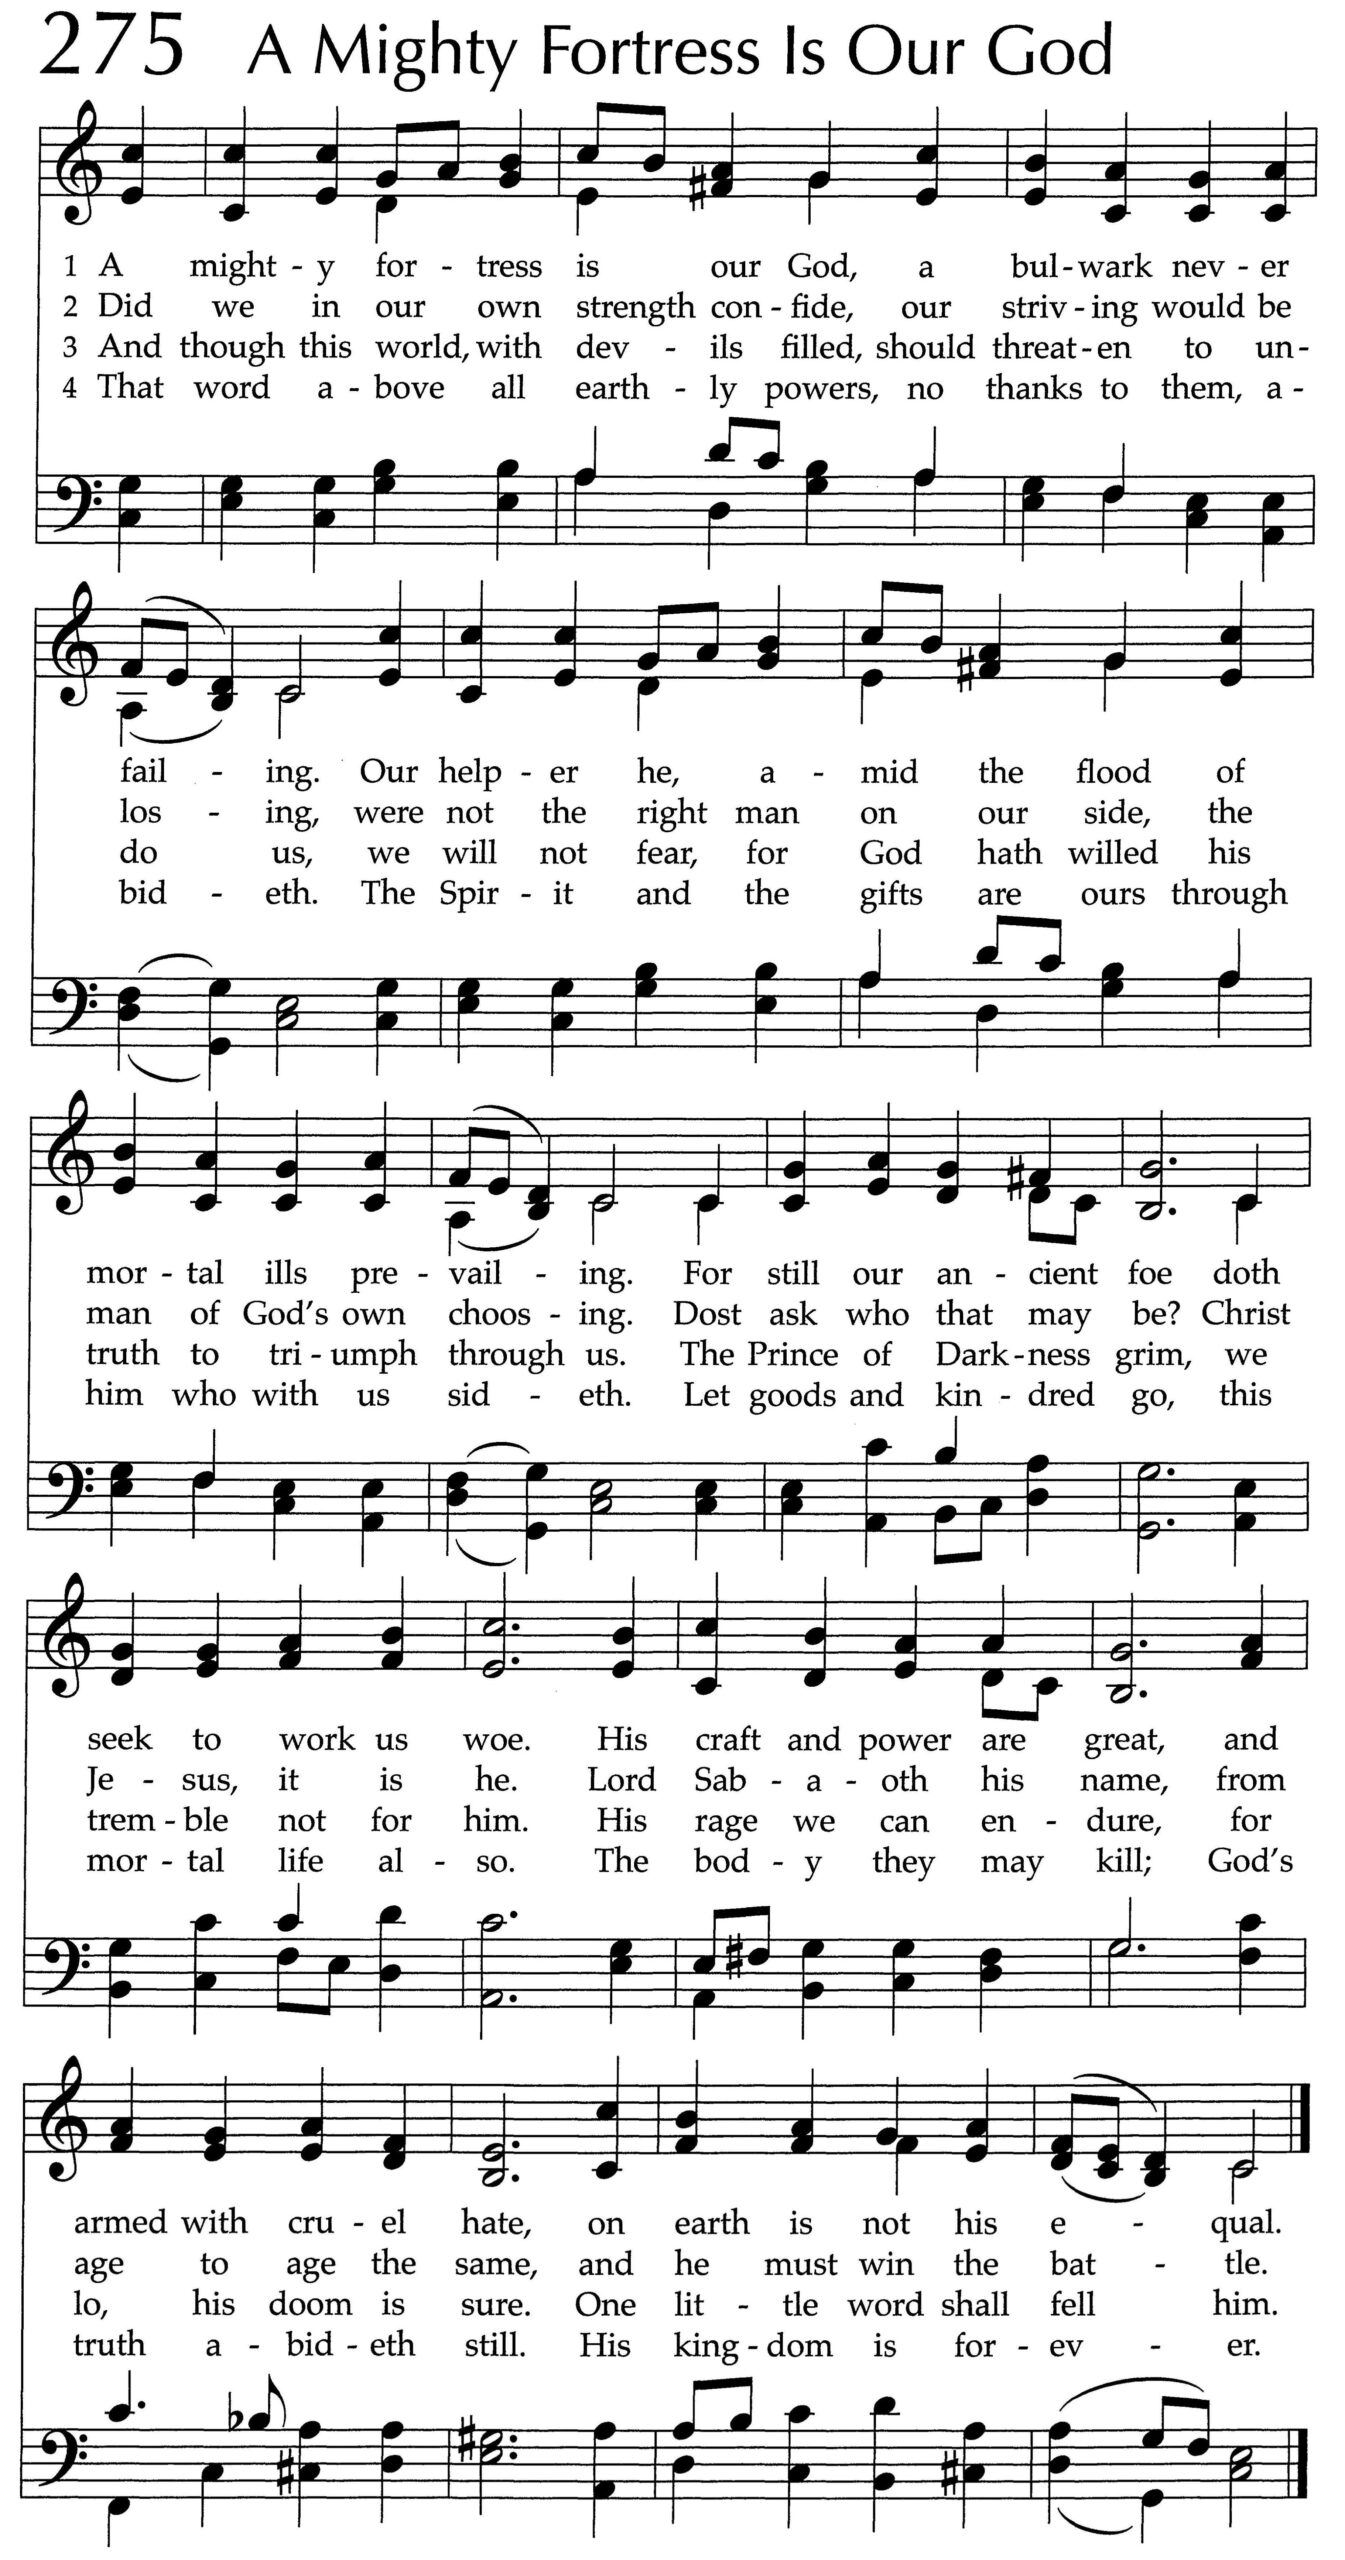 Hymnal page: 275, "A Mighty Fortress Is Our God"